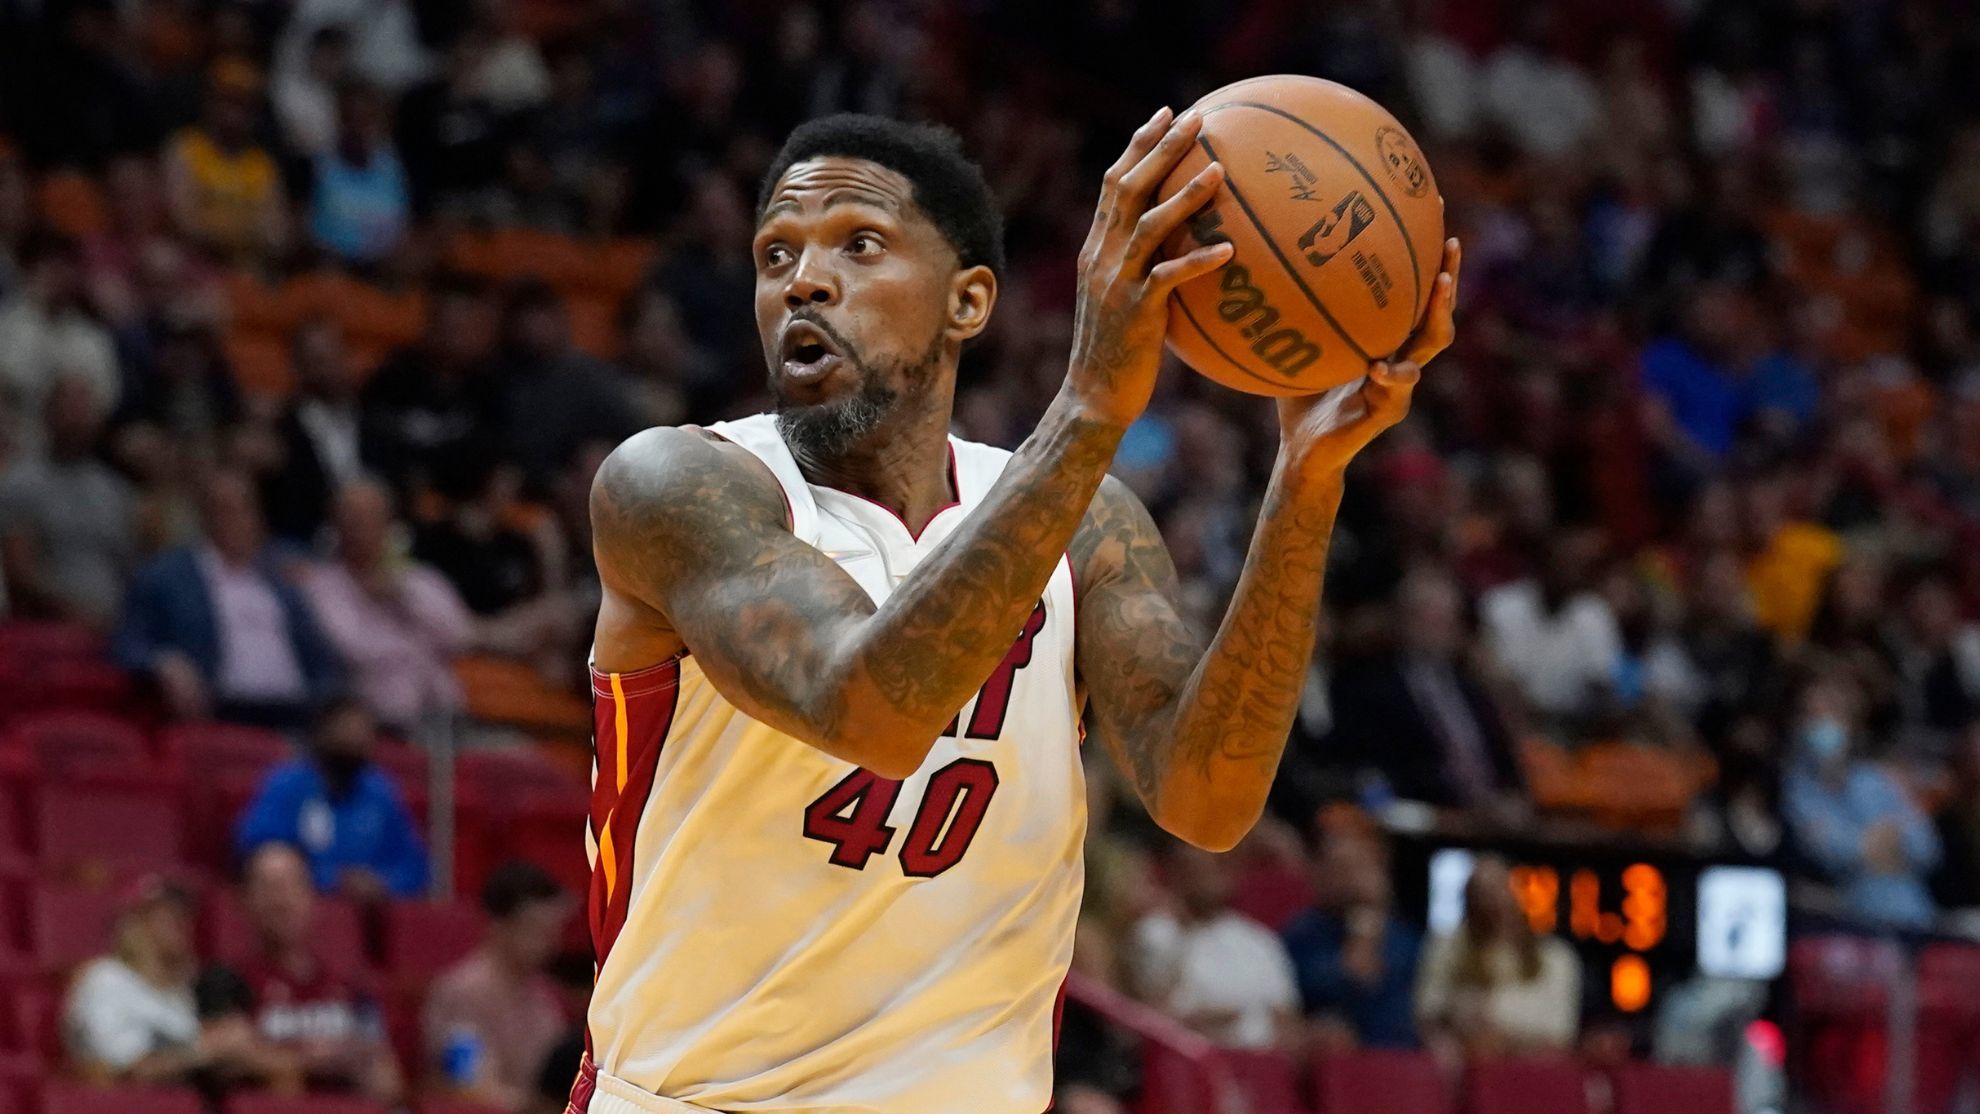 Udonis Haslem announces official retirement from the NBA